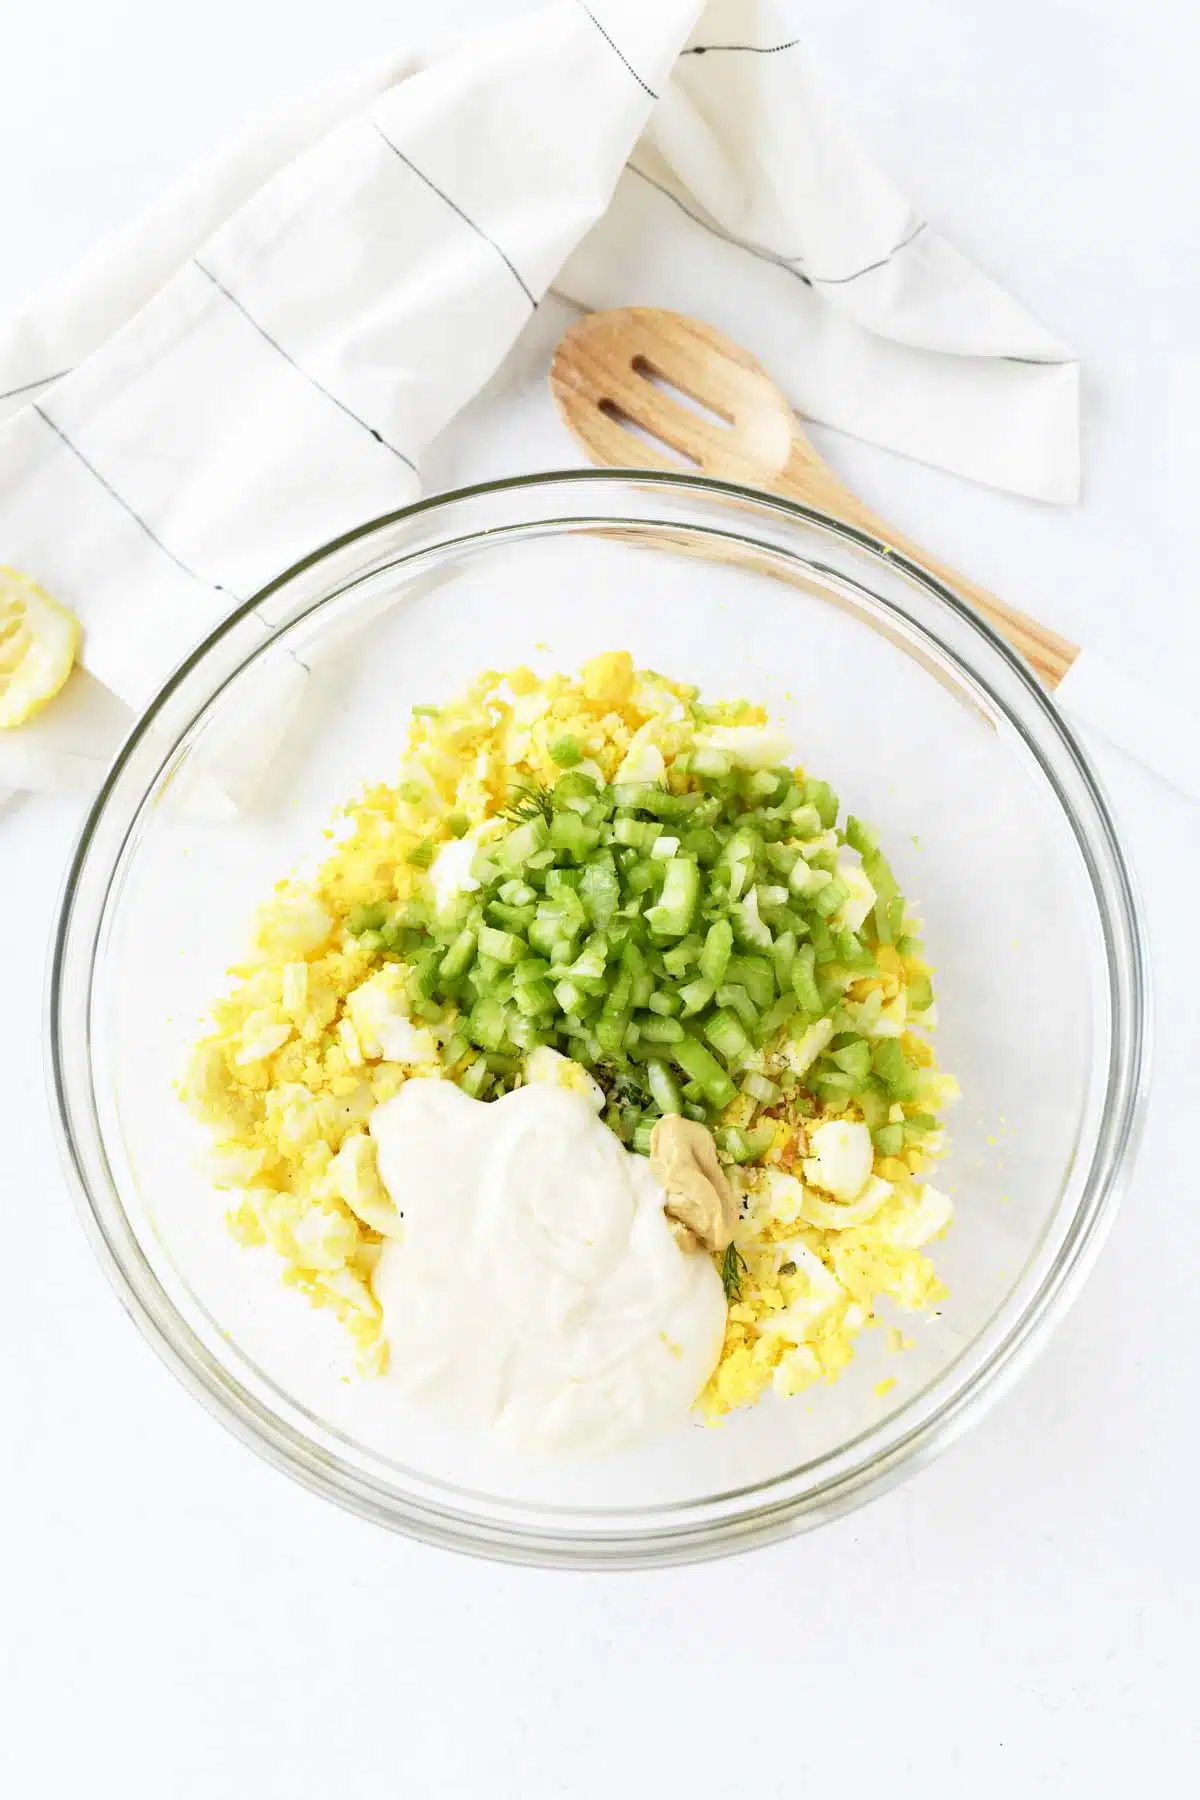 Egg salad ingredients in a bowl on a white table.